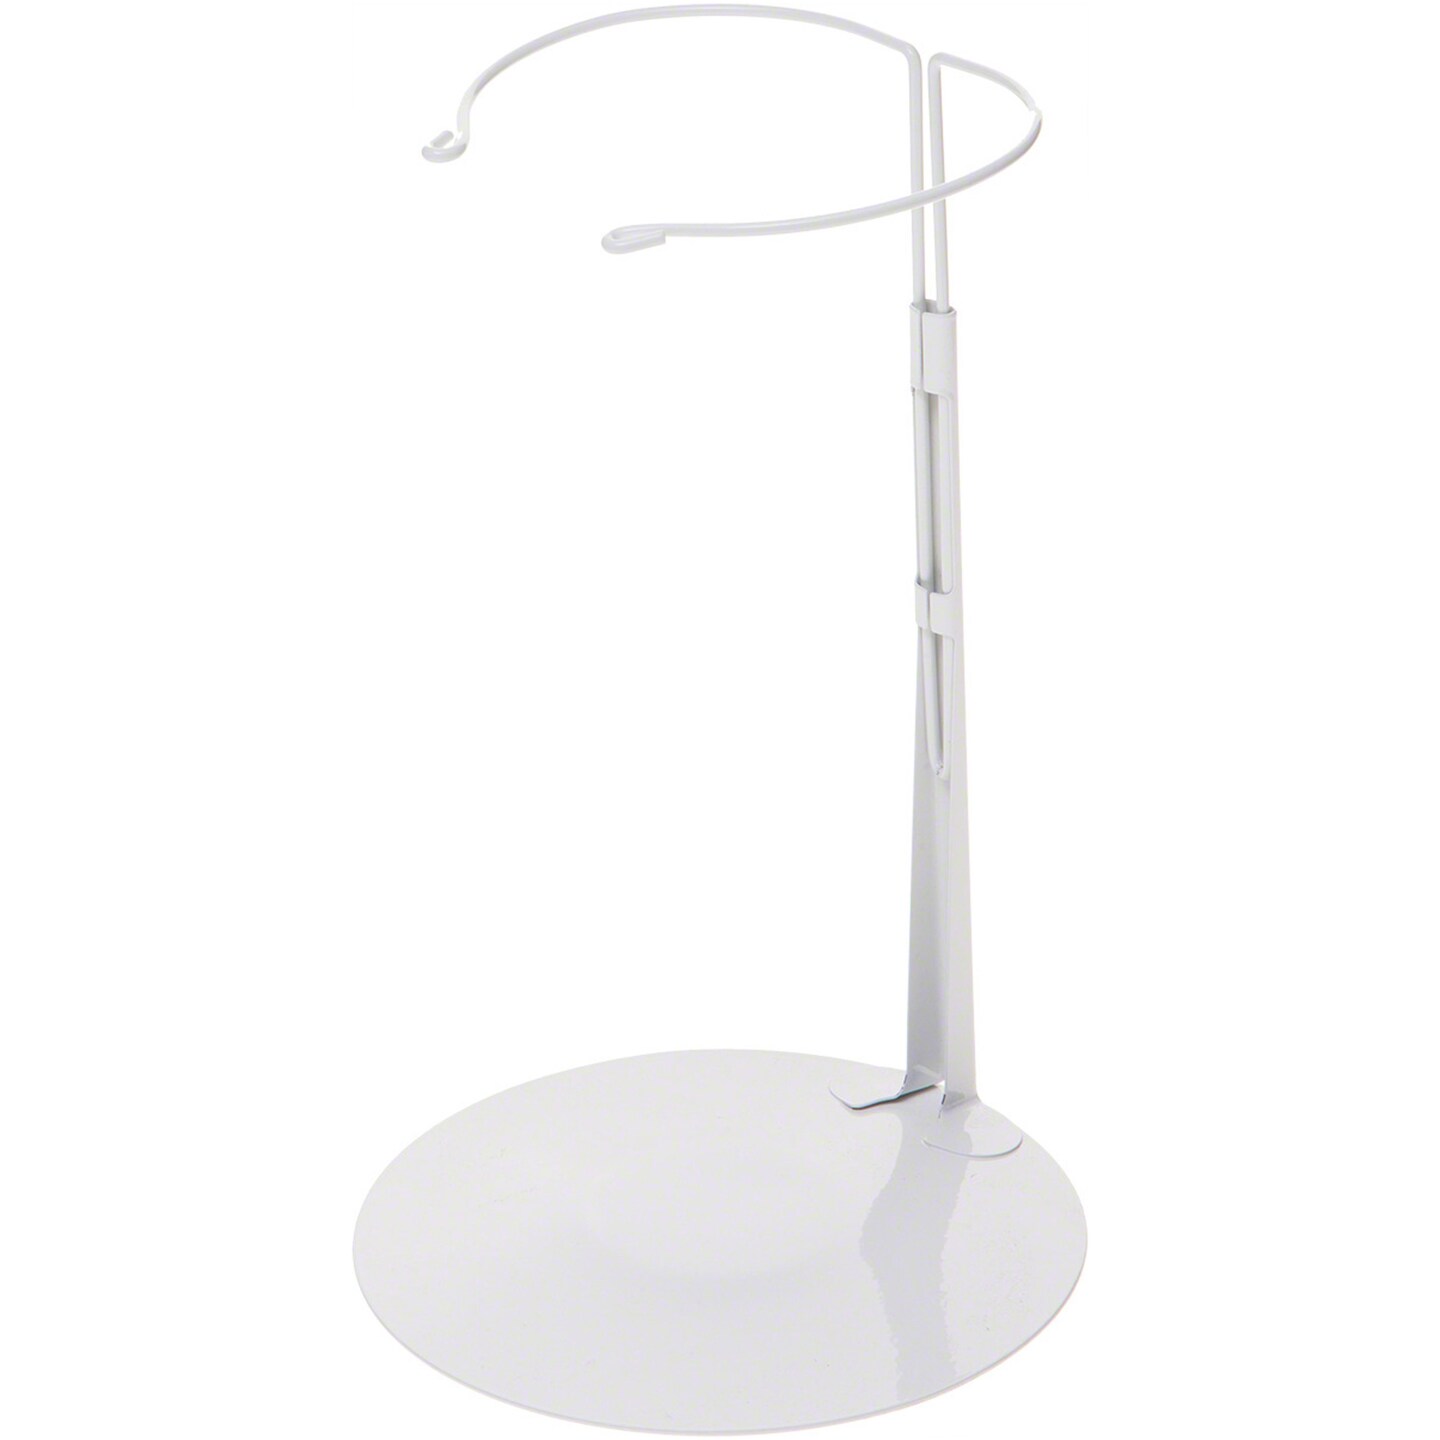 Kaiser 3301 White Adjustable Doll Stand, fits 16 to 26 inch Dolls, waist width adjusts from 6 to 6.75 inches